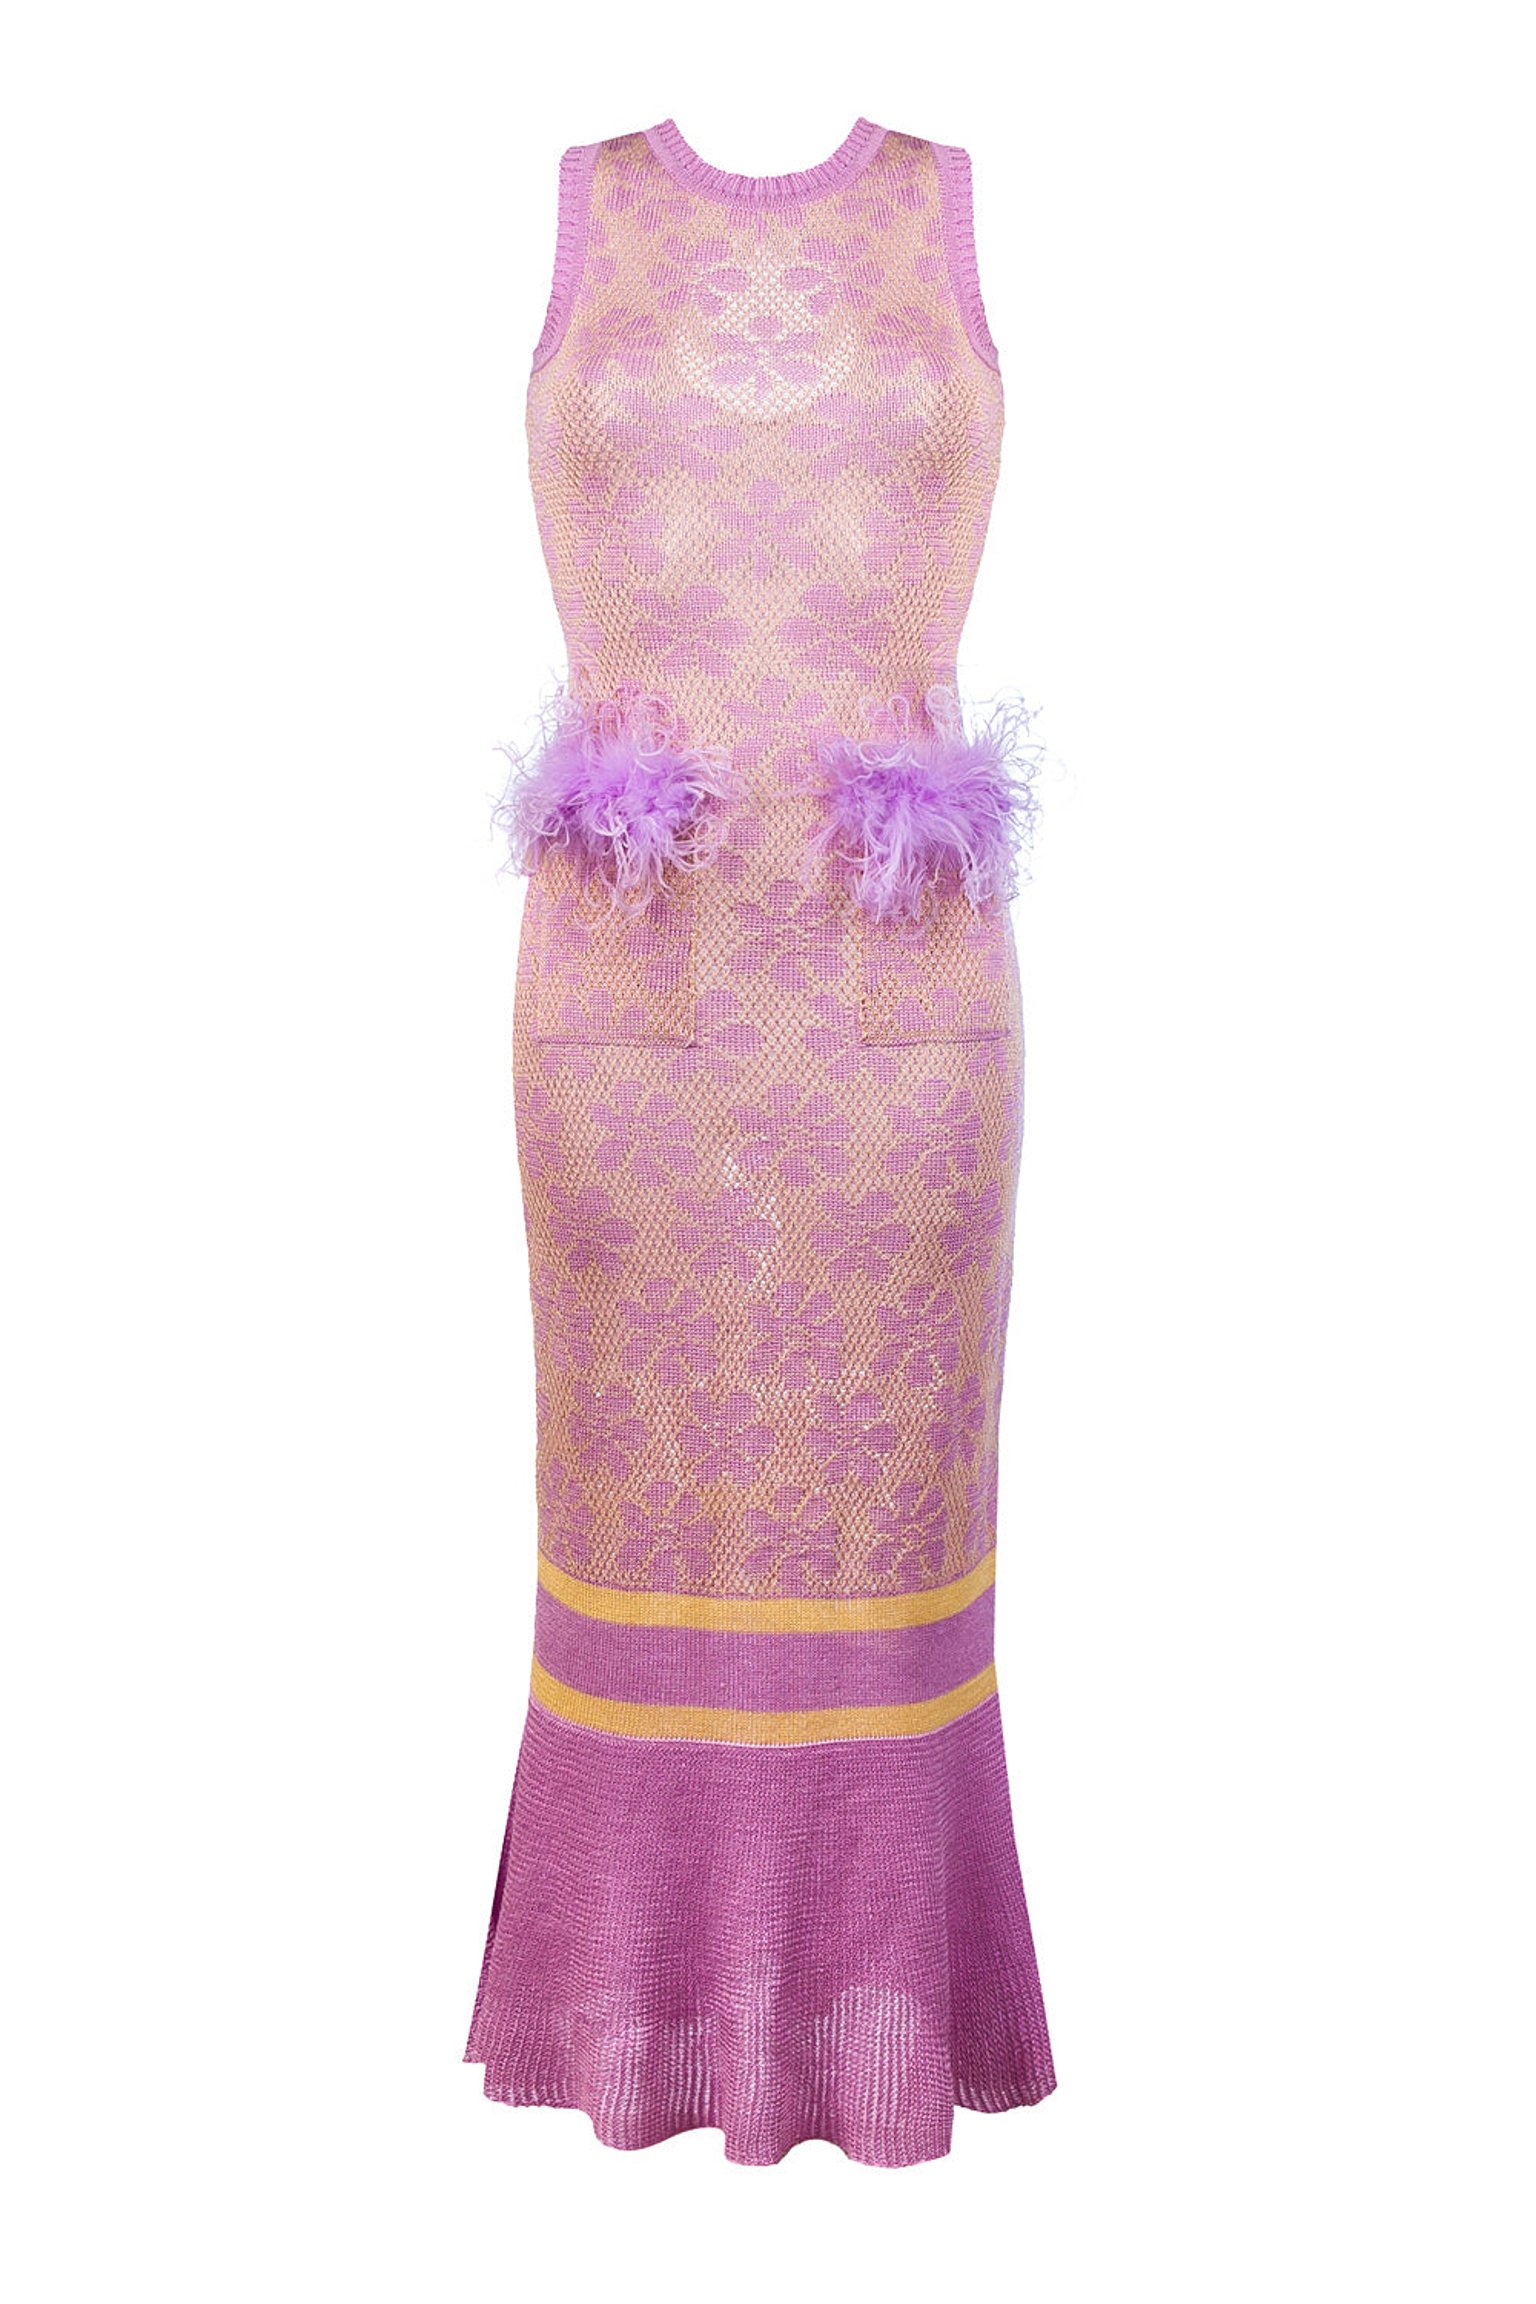 ANDREEVA ANDREEVA LAVENDER KNIT DRESS WITH FEATHERS DETAILS